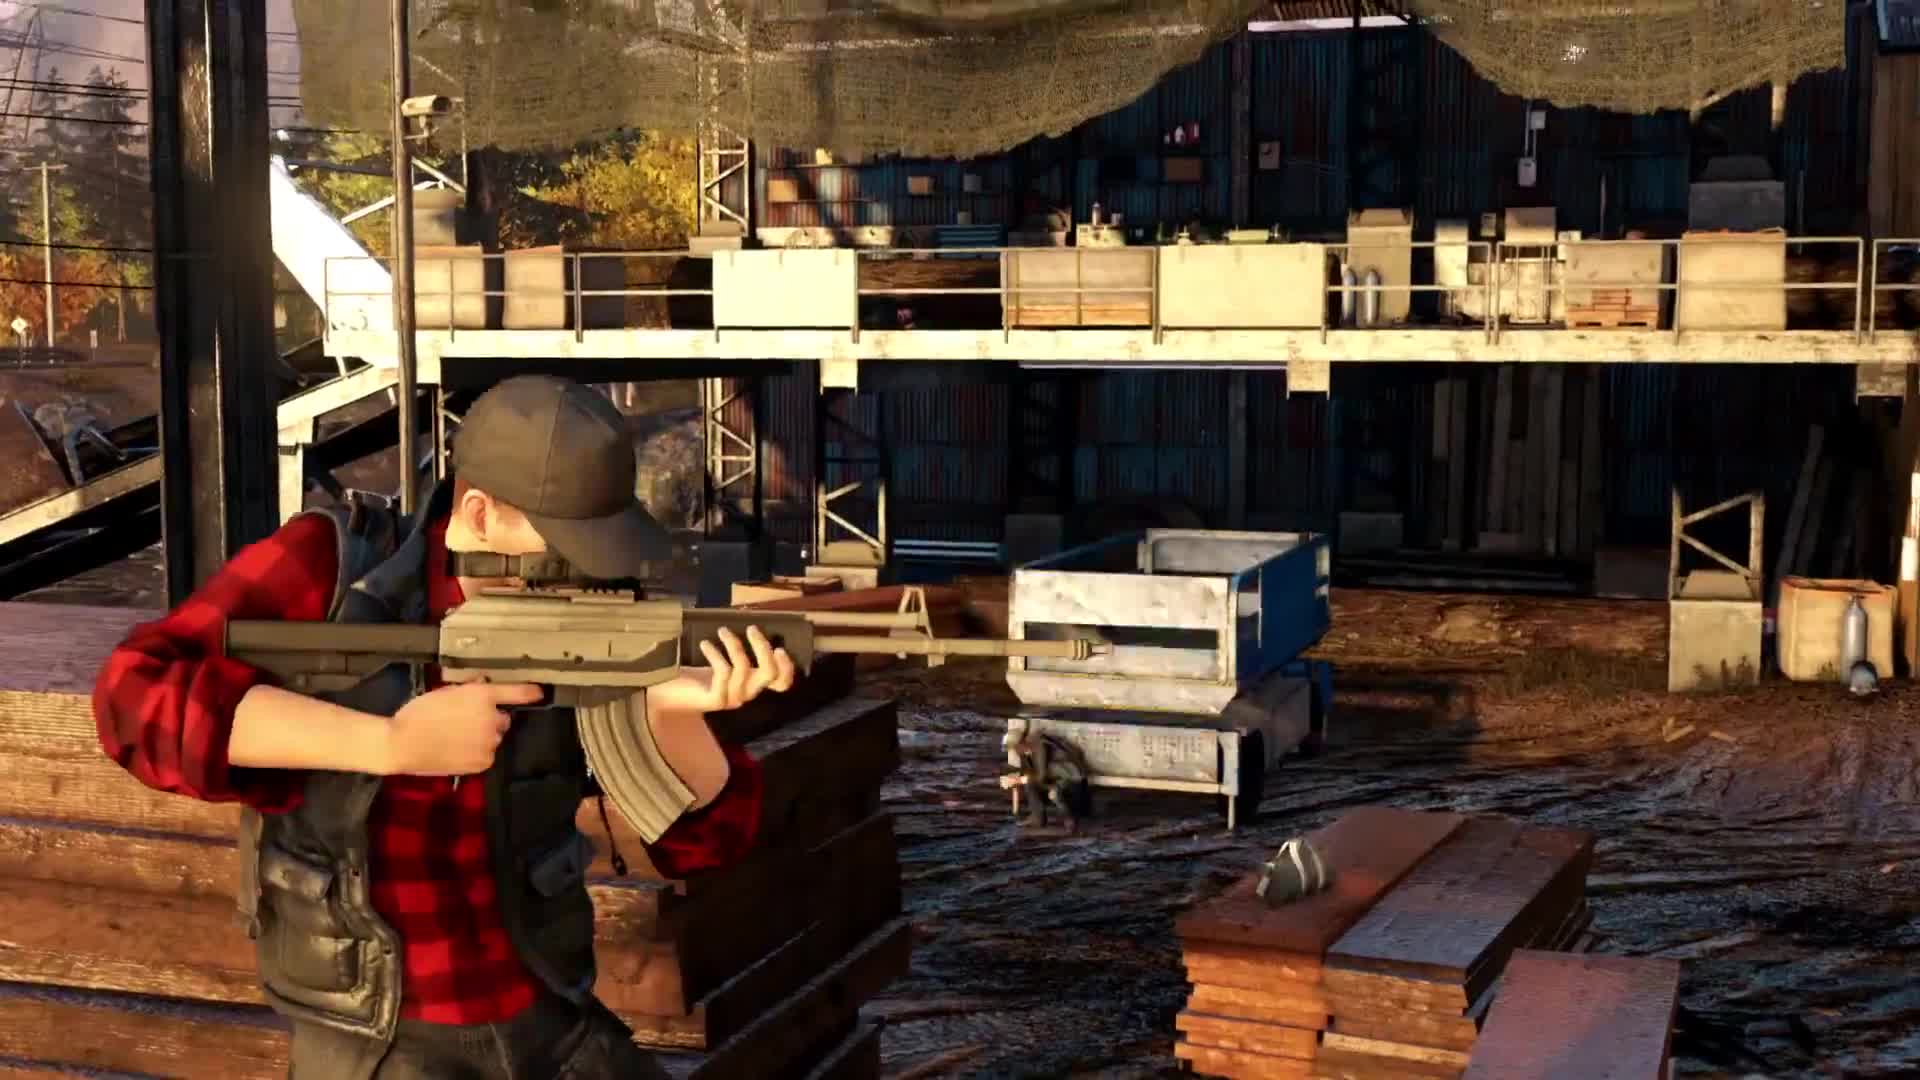 Watch Dogs: Bad blood - DLC launch